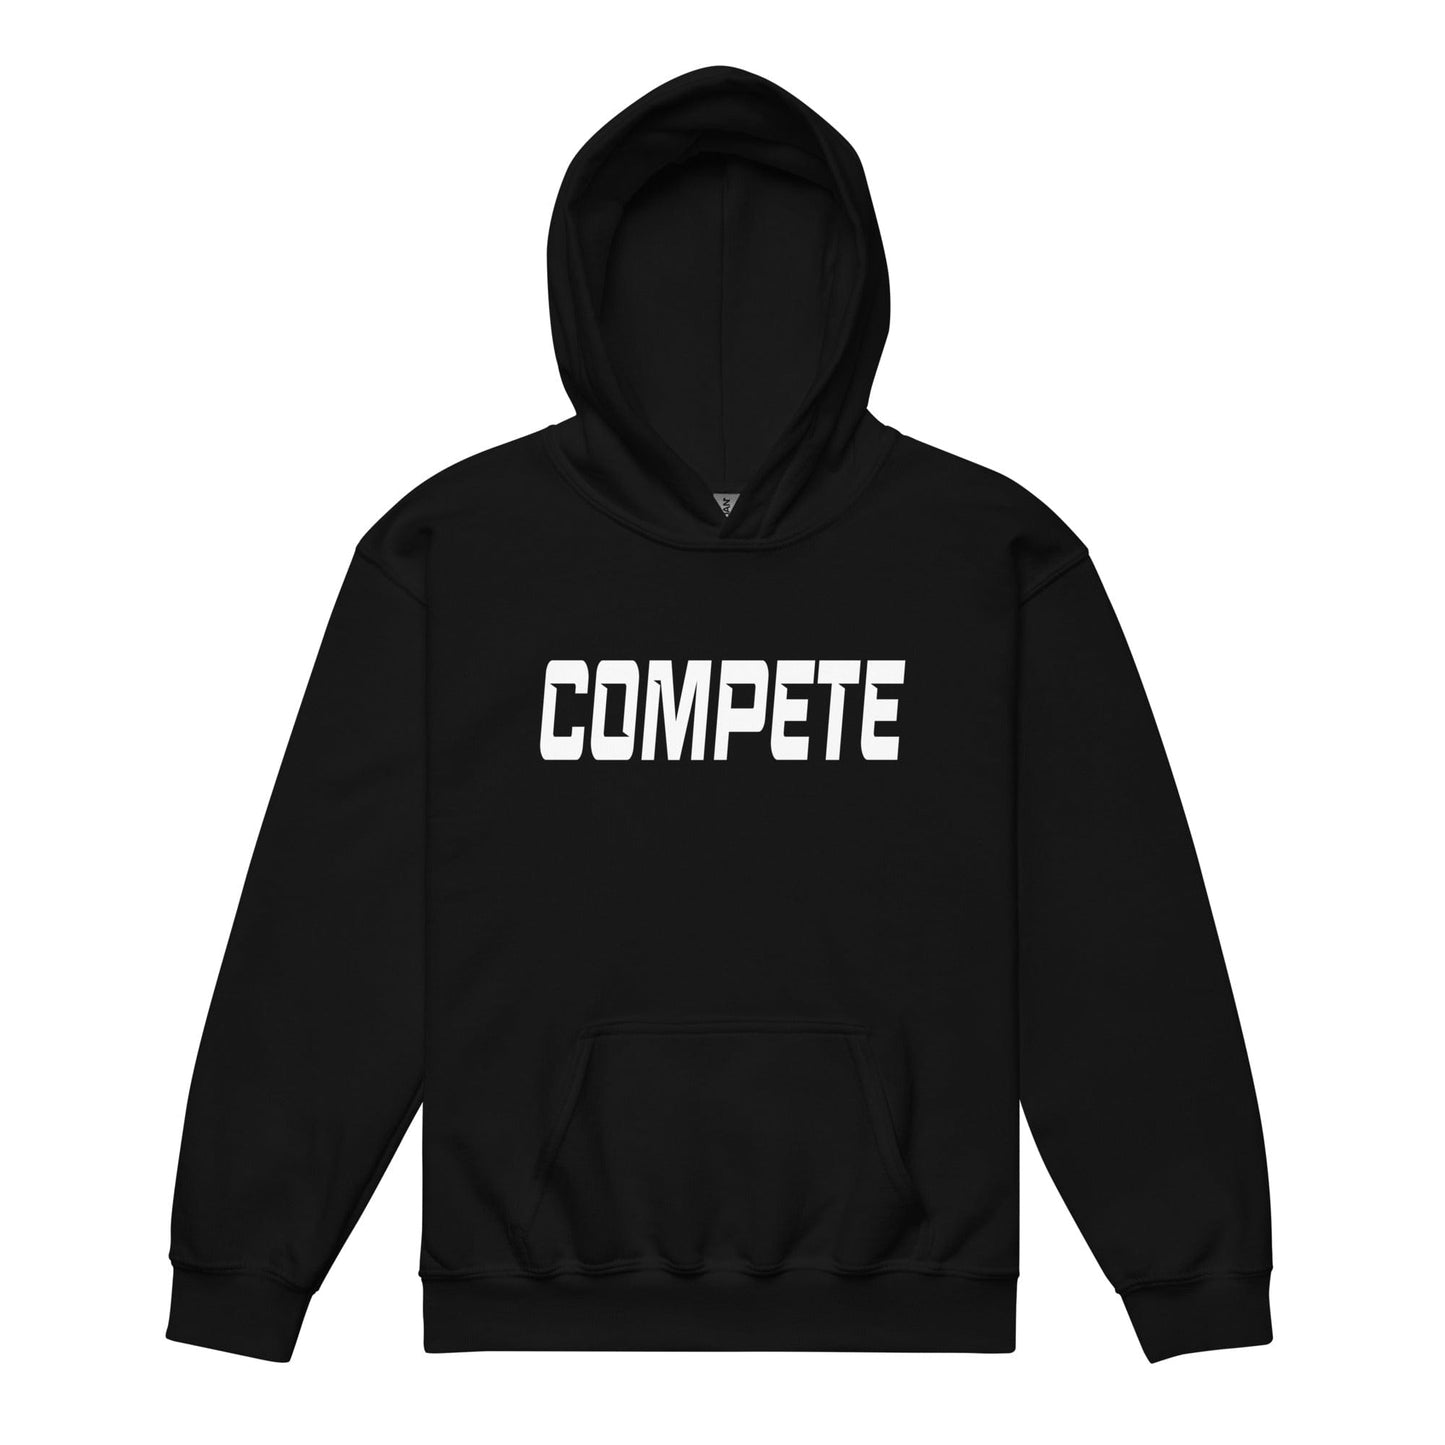 Compete - Youth Hoodie